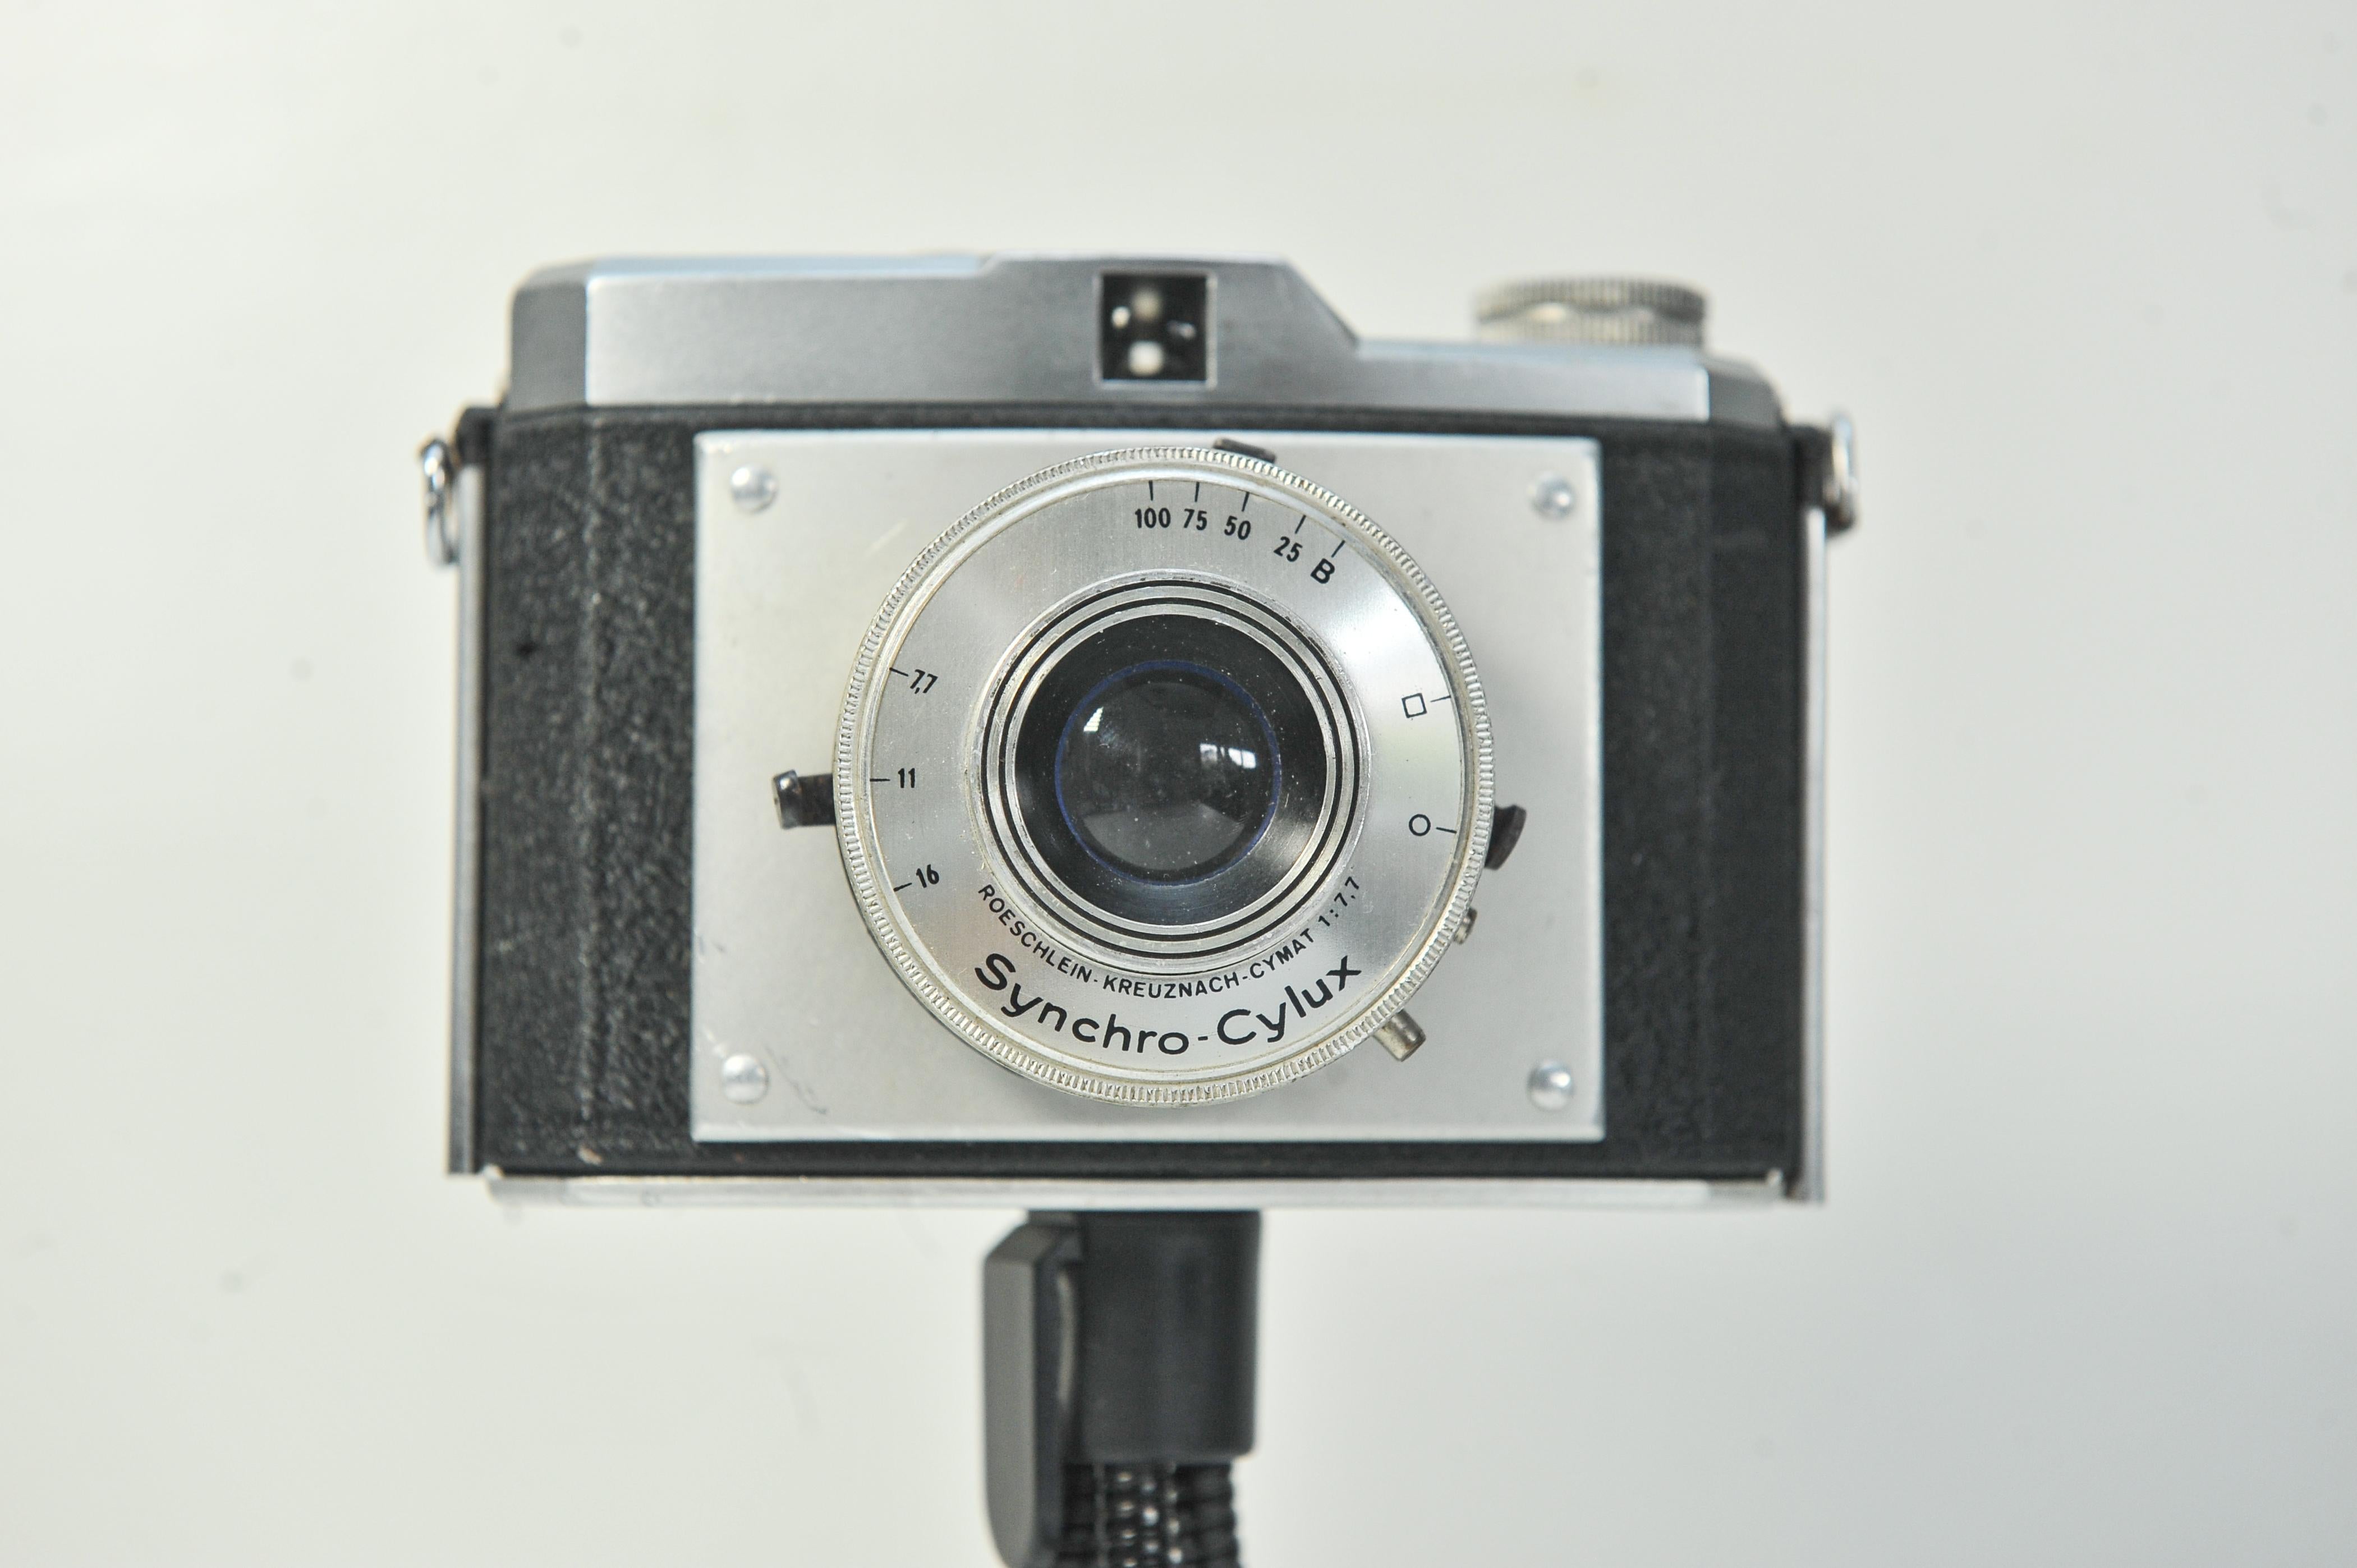 Cima 44 Luxette 127 Roll Film Viewfinder Camera With Roeschlein Kreuznach Cymat F7.7 Fixed Lens With Synchro-Cylux Shutter 1950's Made by Zimmermann in Germany

PAT angem

The Luxette is a rigid body viewfinder camera for type No. 127 roll film. Its